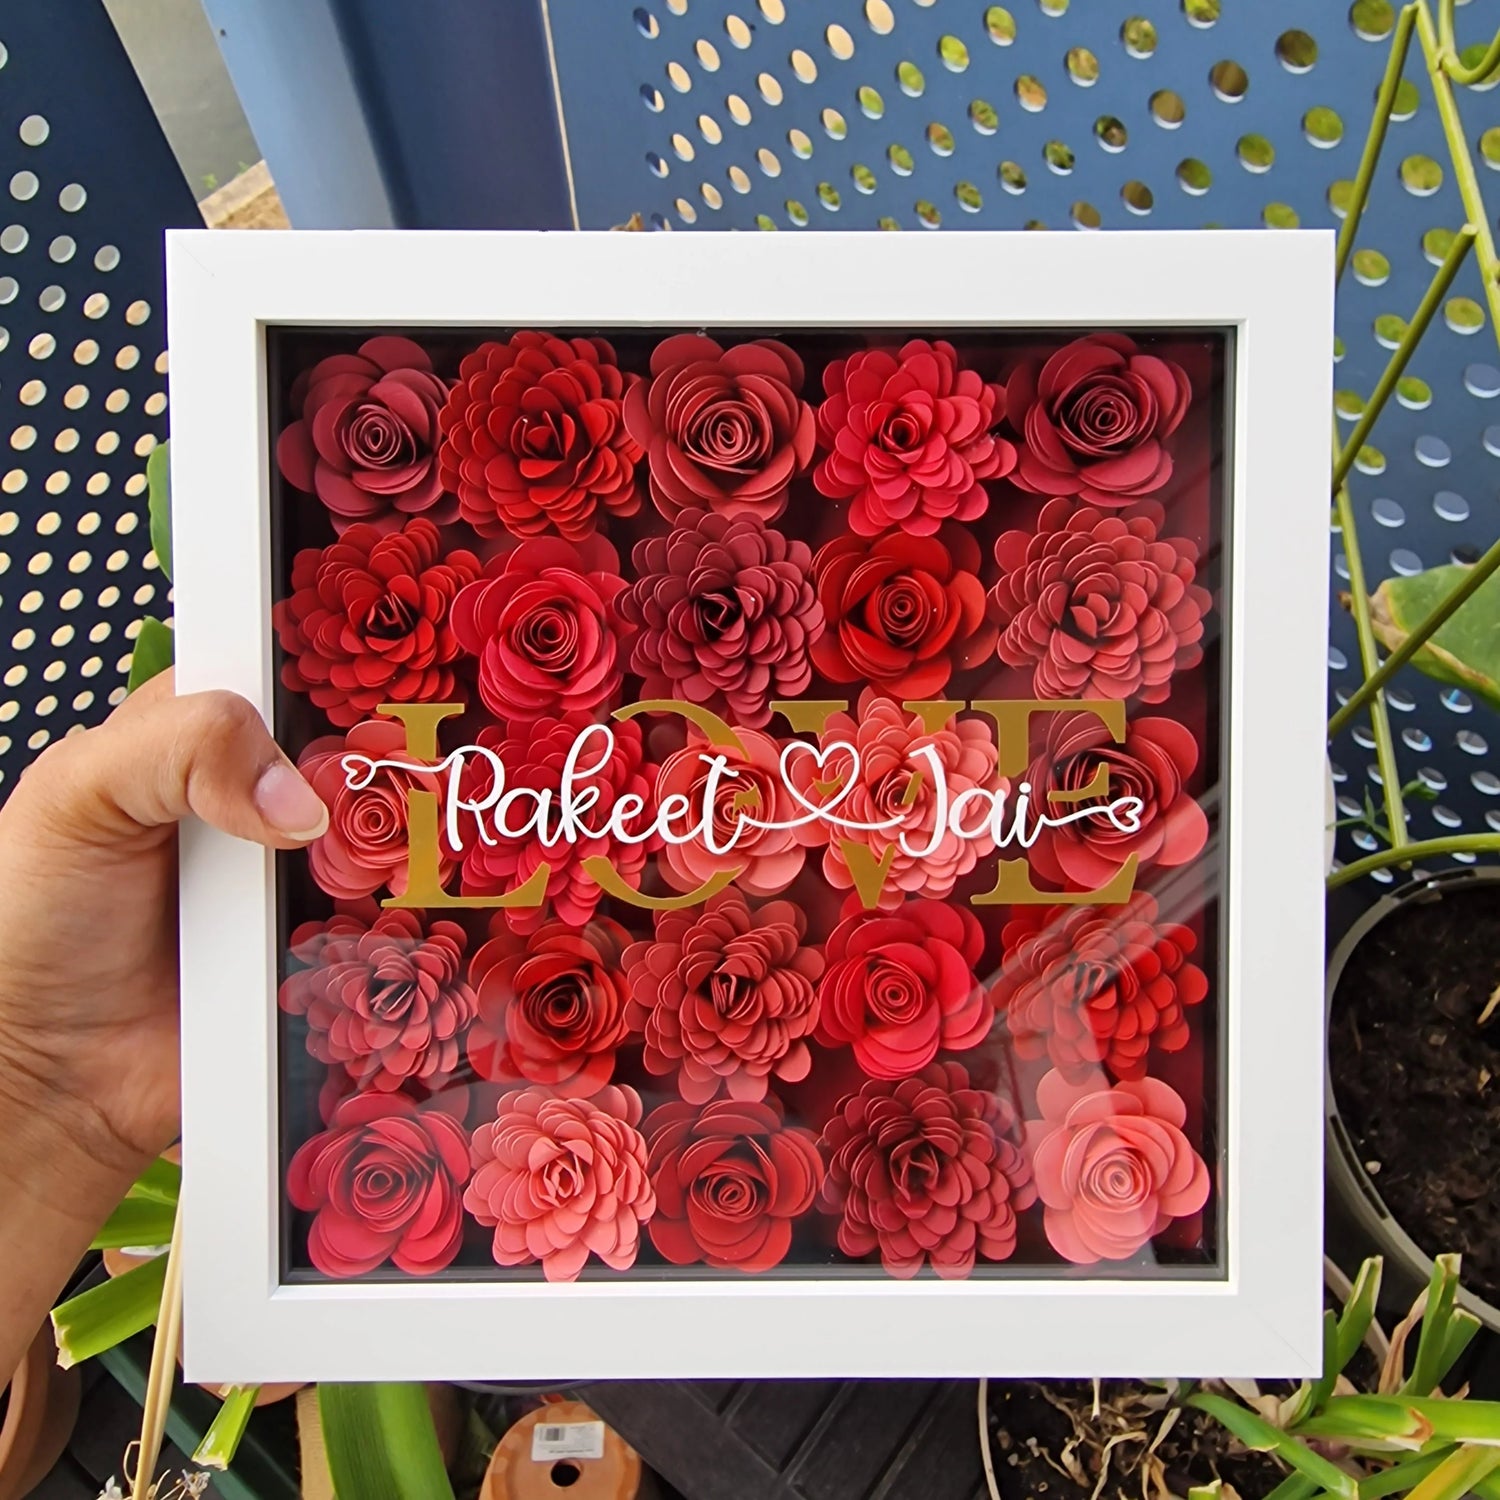 Personalised Flower Frames & Decorative Gifts